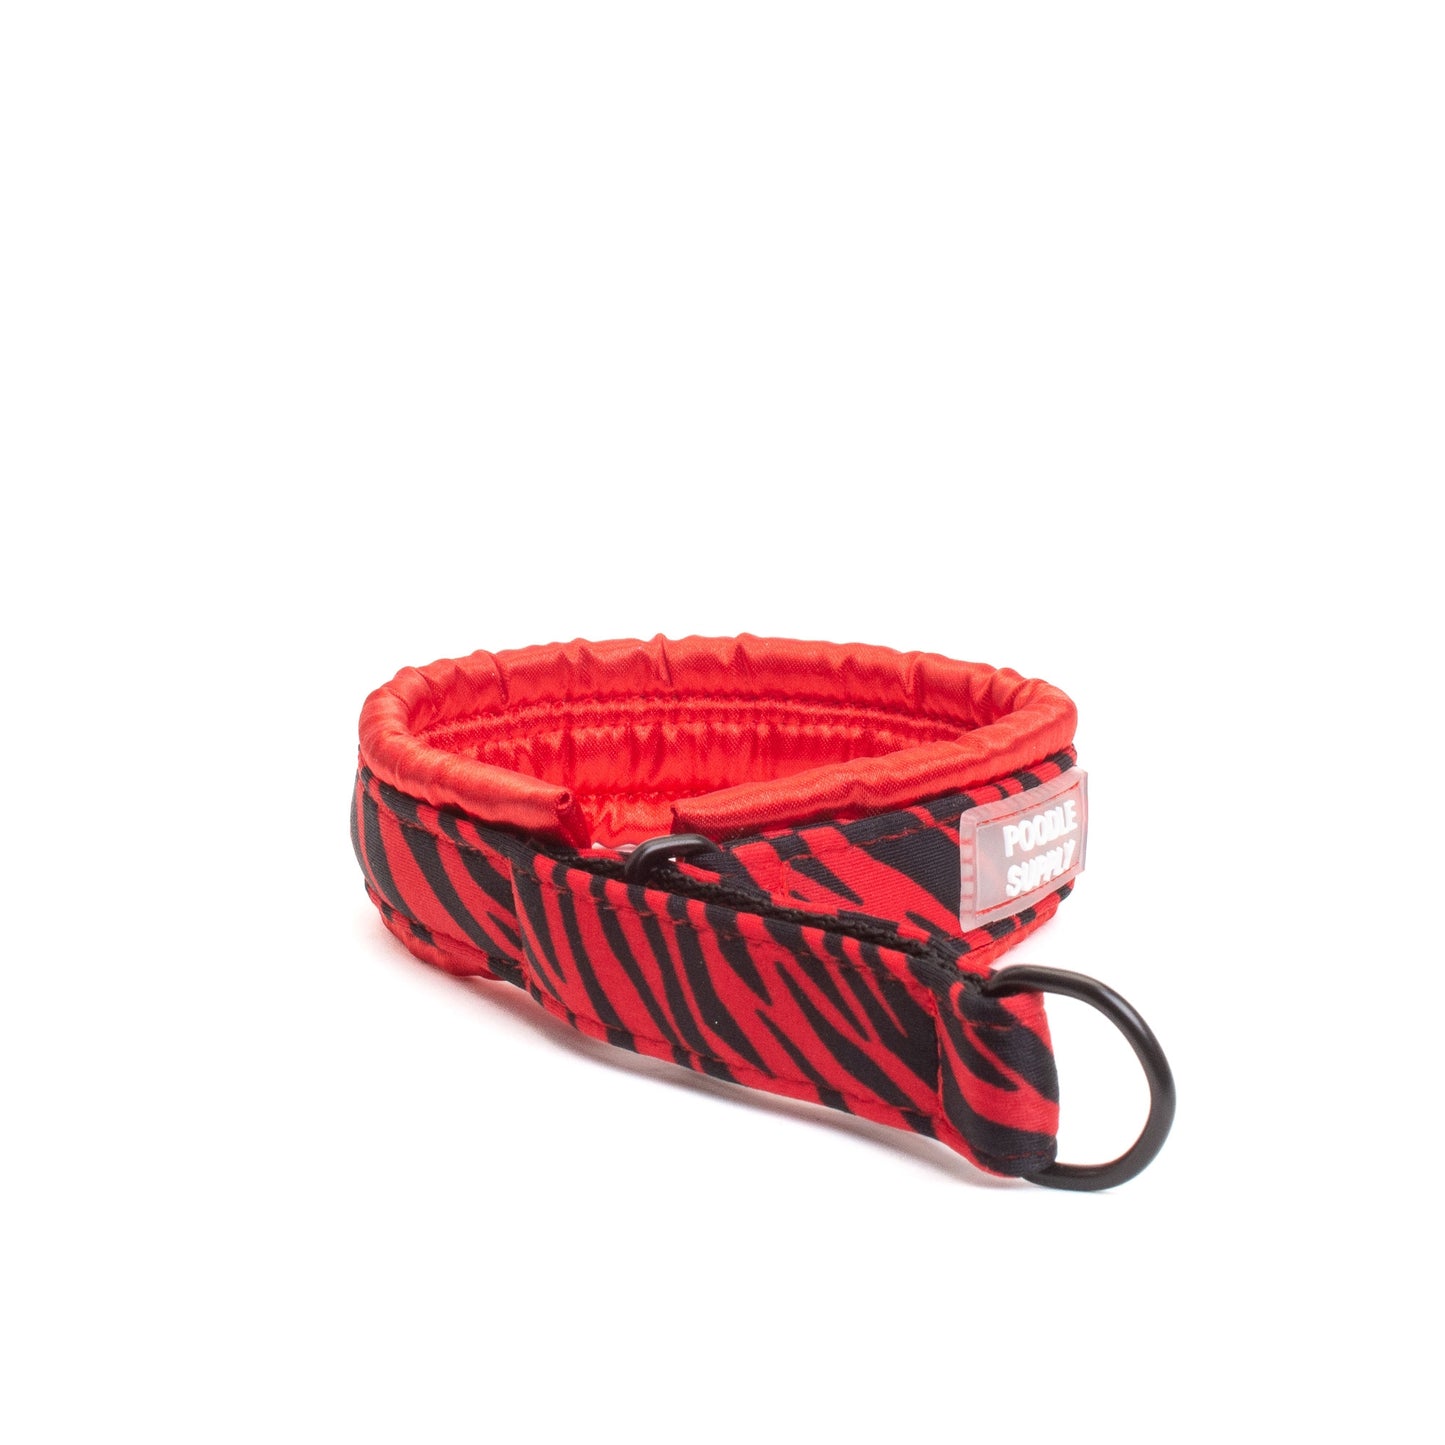 Small / Medium / Large Martingale Collar Poodle Supply Red Zebra